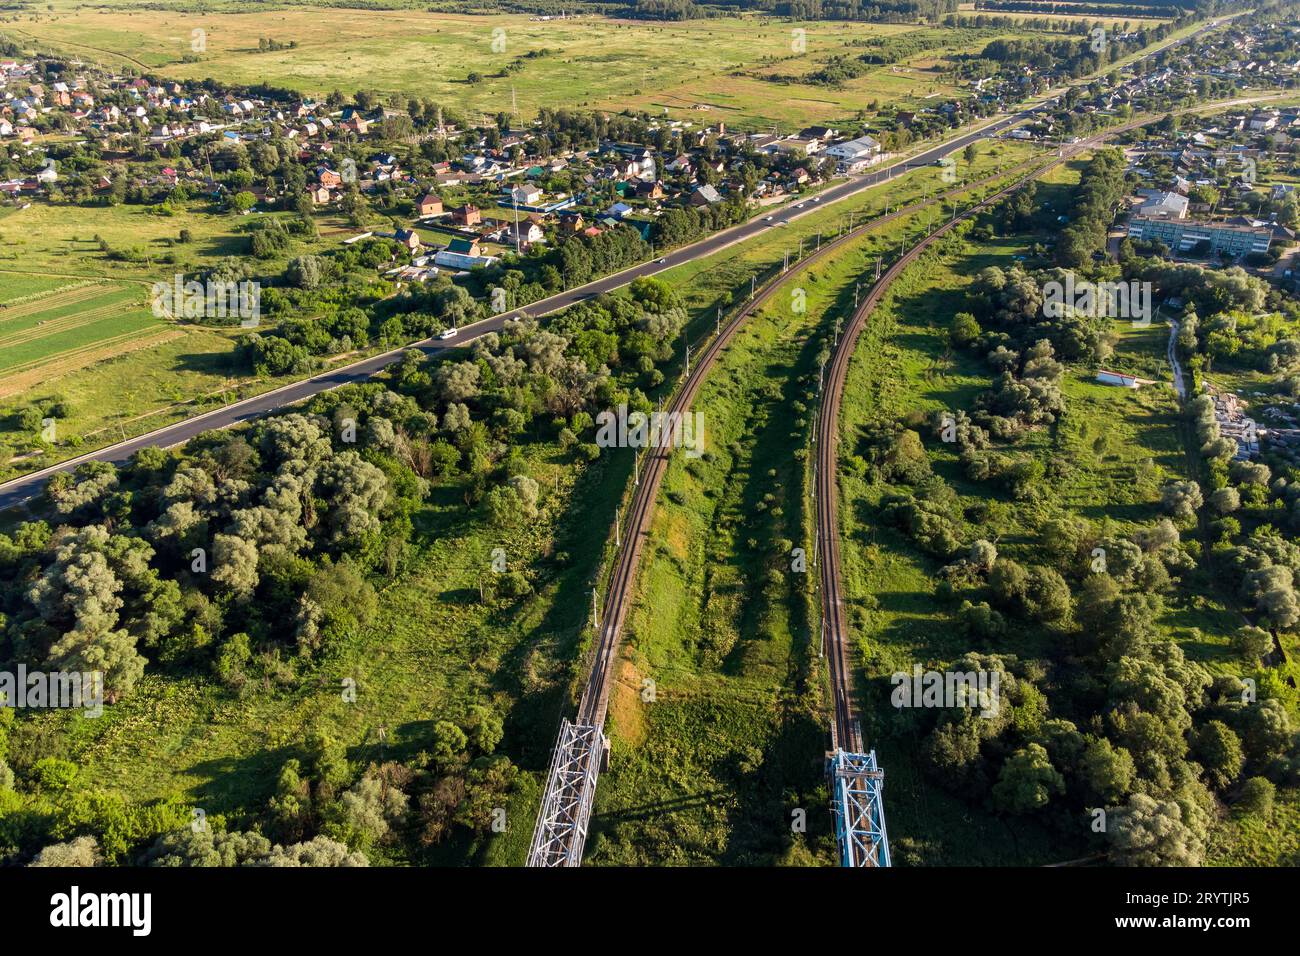 Rural landscape from a high altitude. View of the railway tracks and roads passing through the village Stock Photo